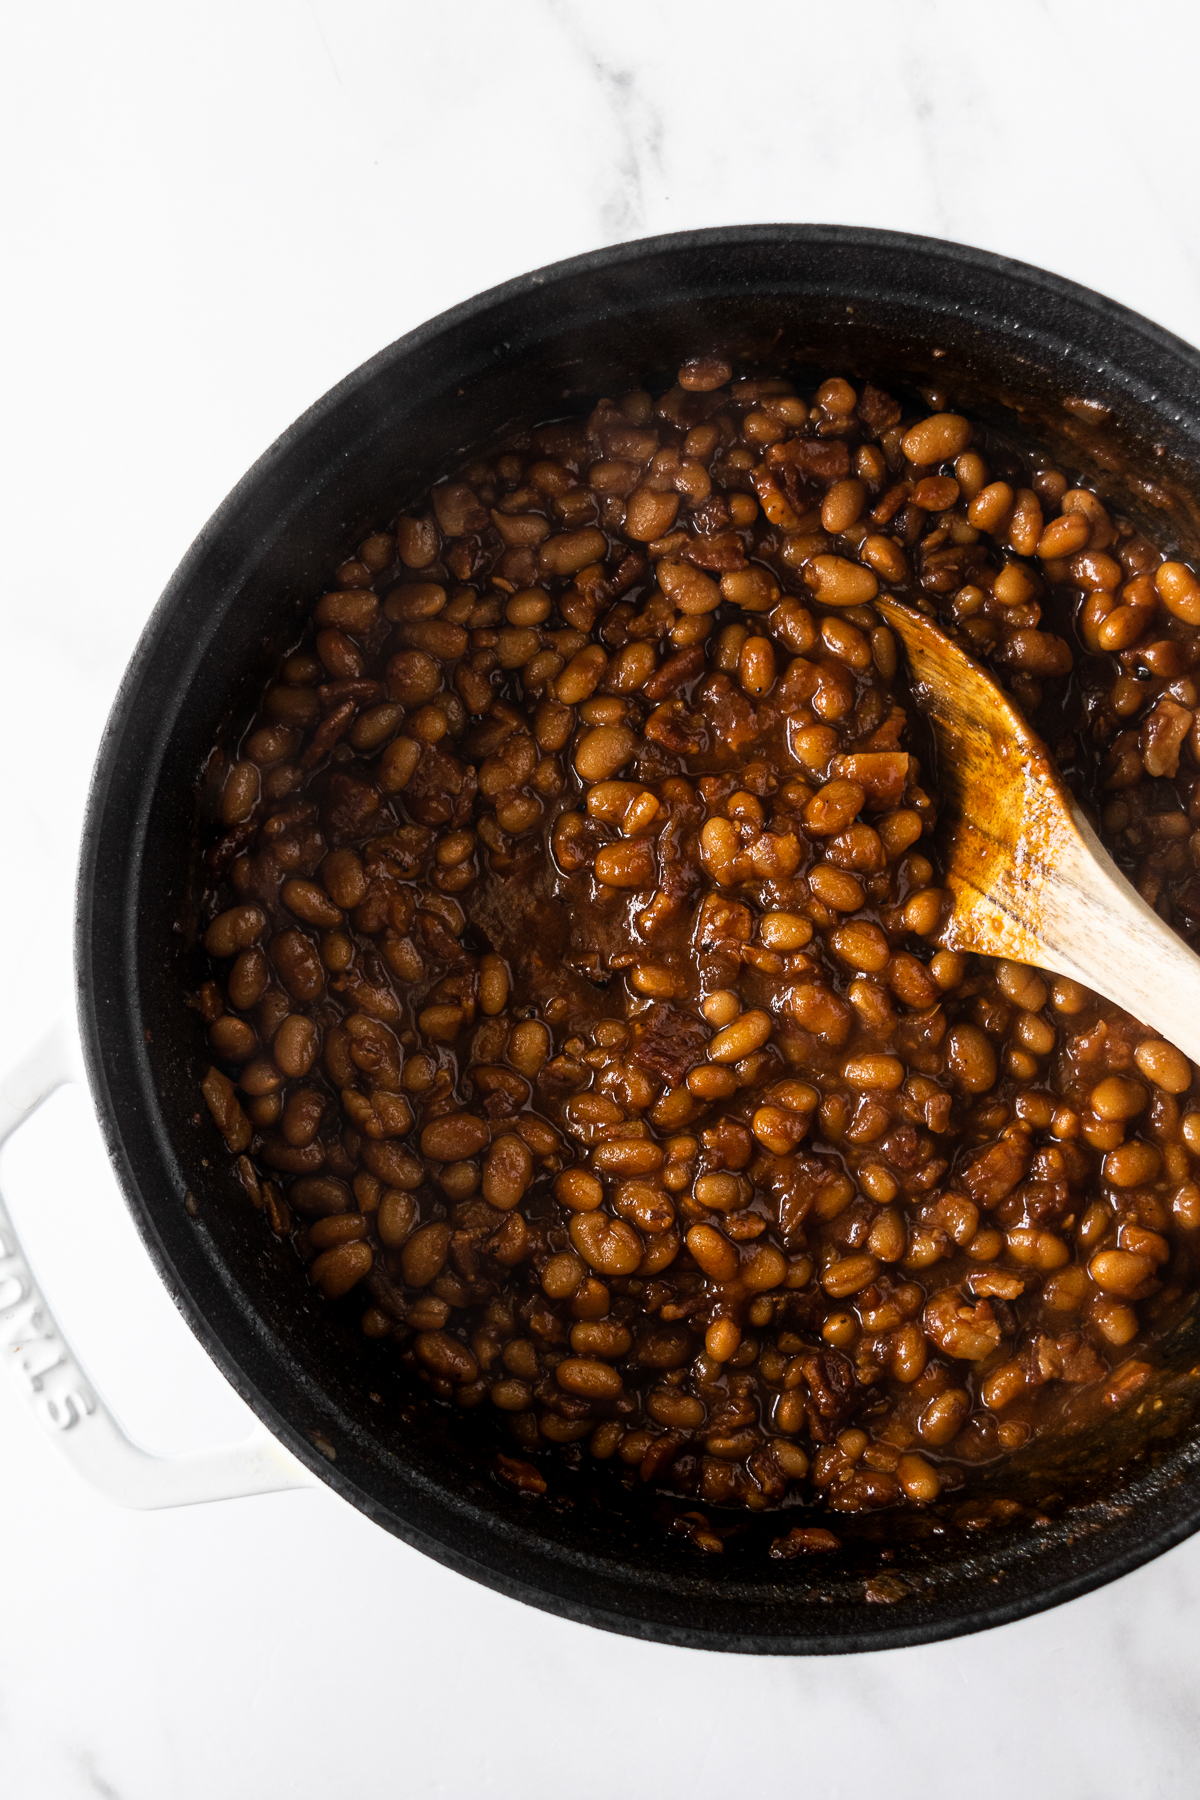 baked beans in a black pot with a wooden spoon.